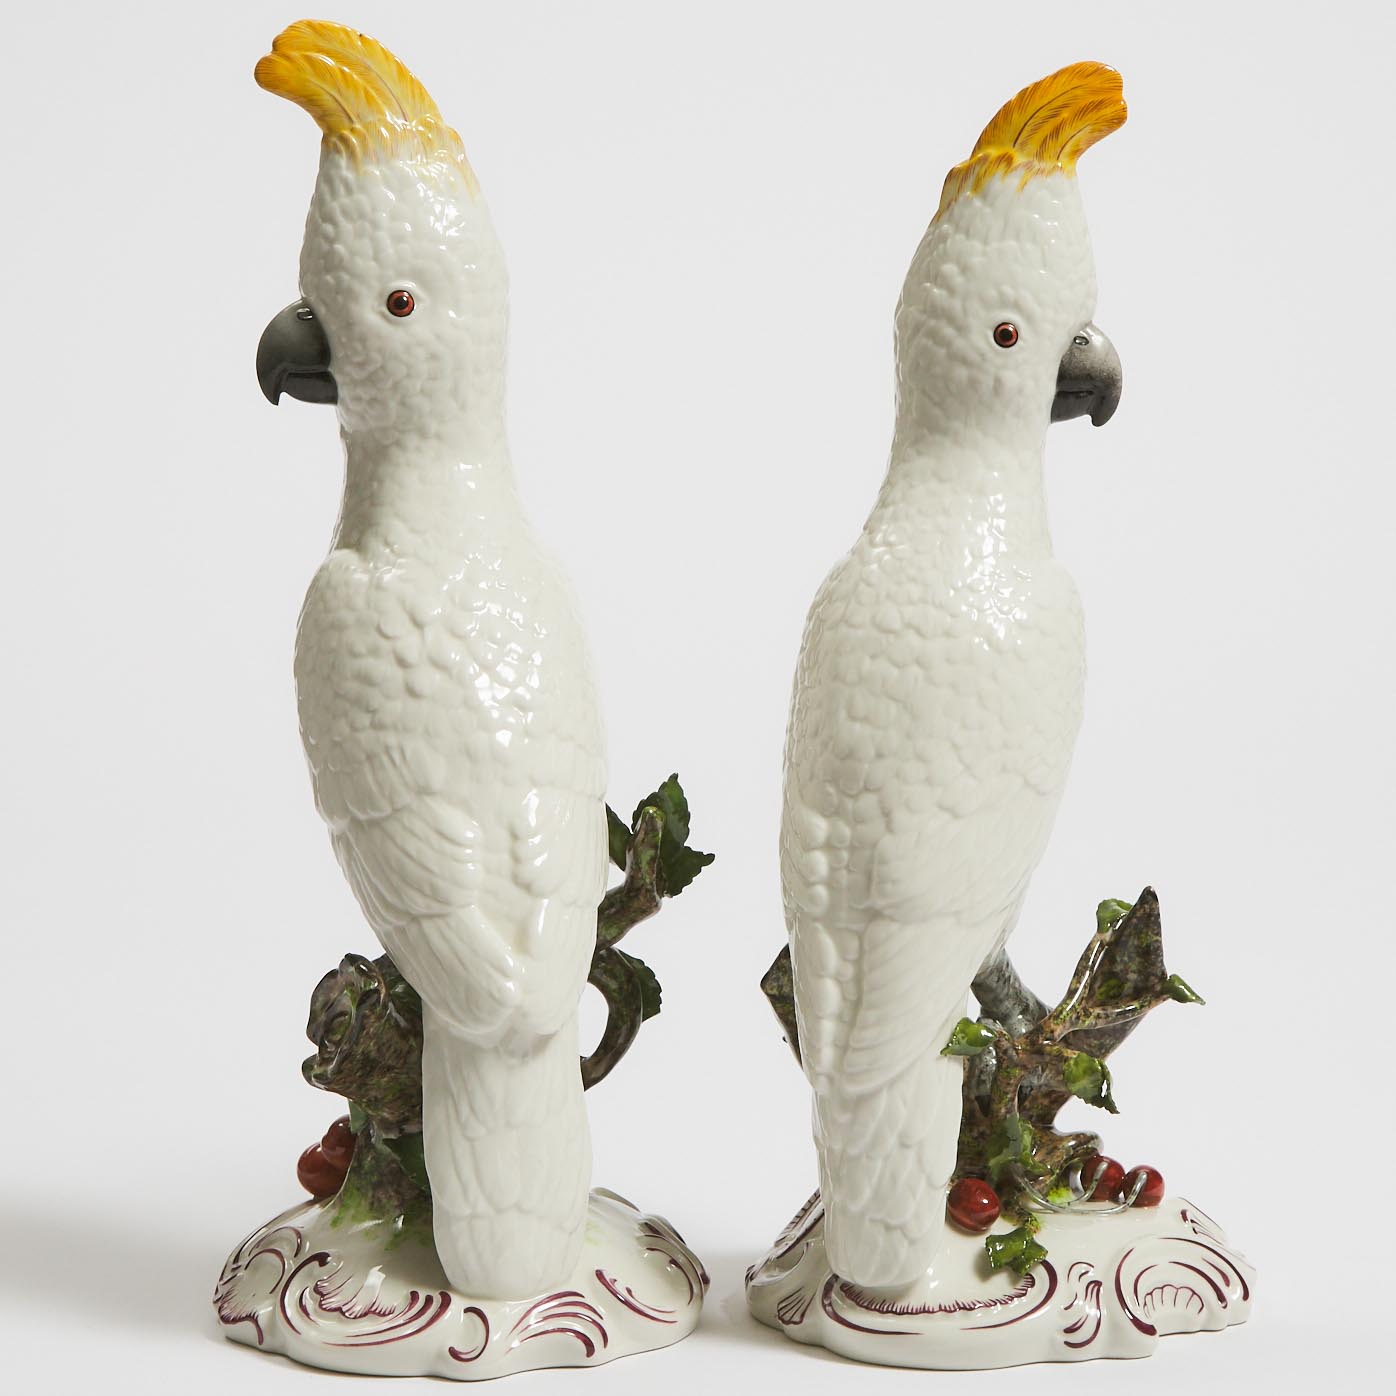 Pair of Nymphenburg Models of Yellow-Crested Cockatoos, 20th century